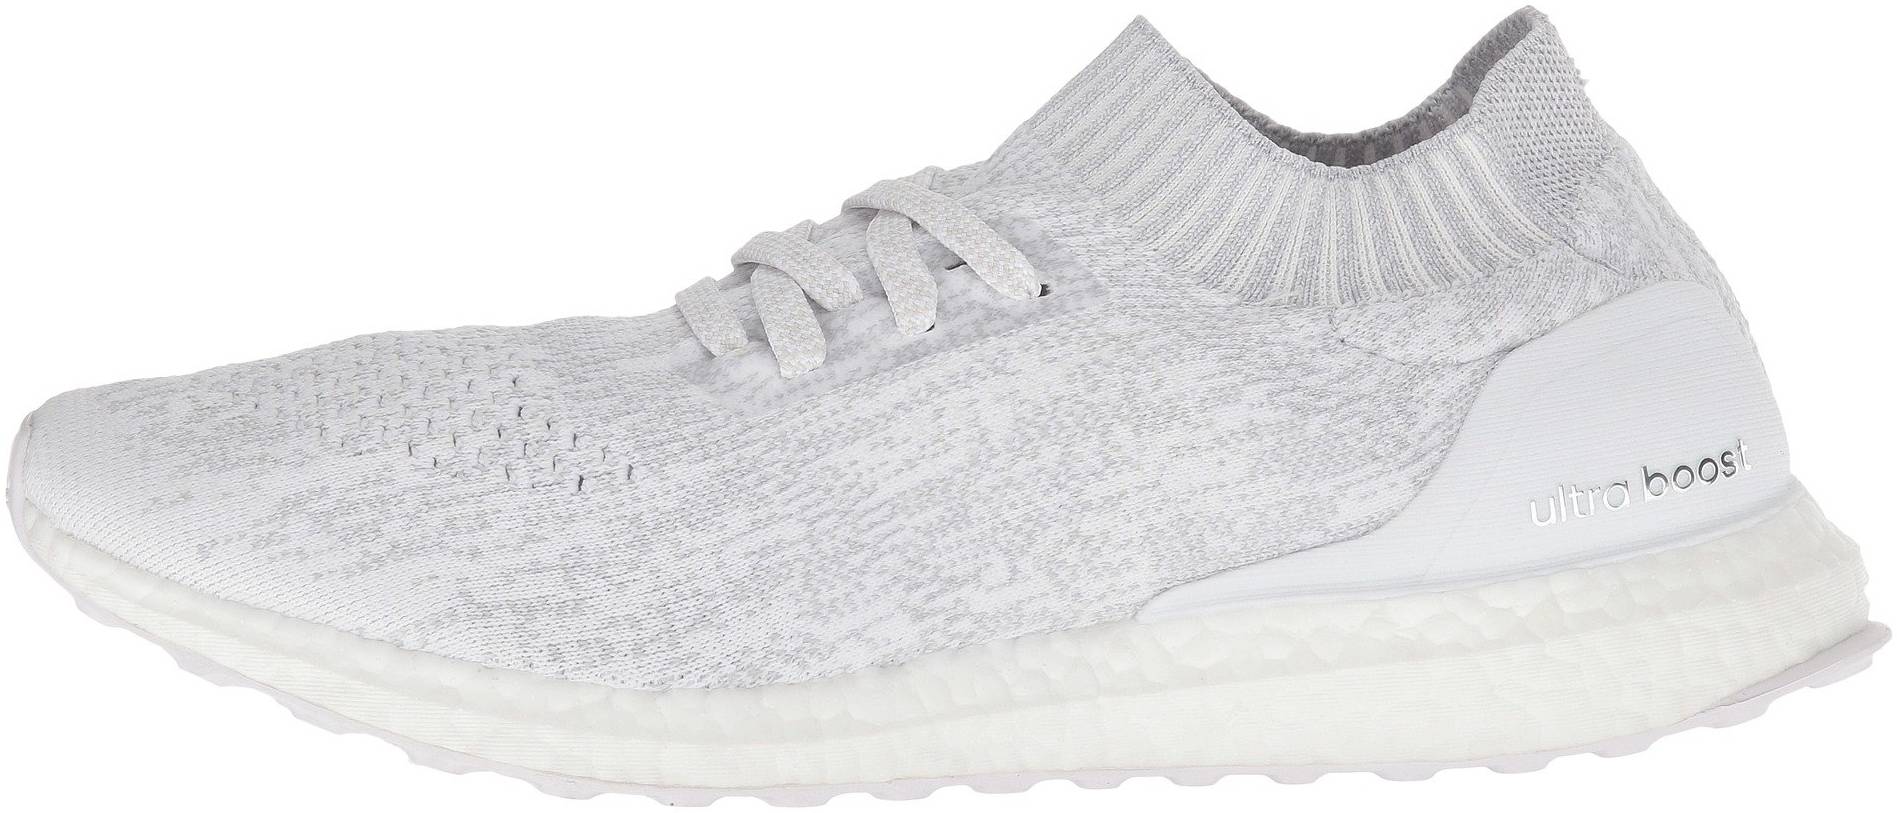 Adidas Ultraboost Uncaged Review 2022, Facts, Deals ($126) | RunRepeat